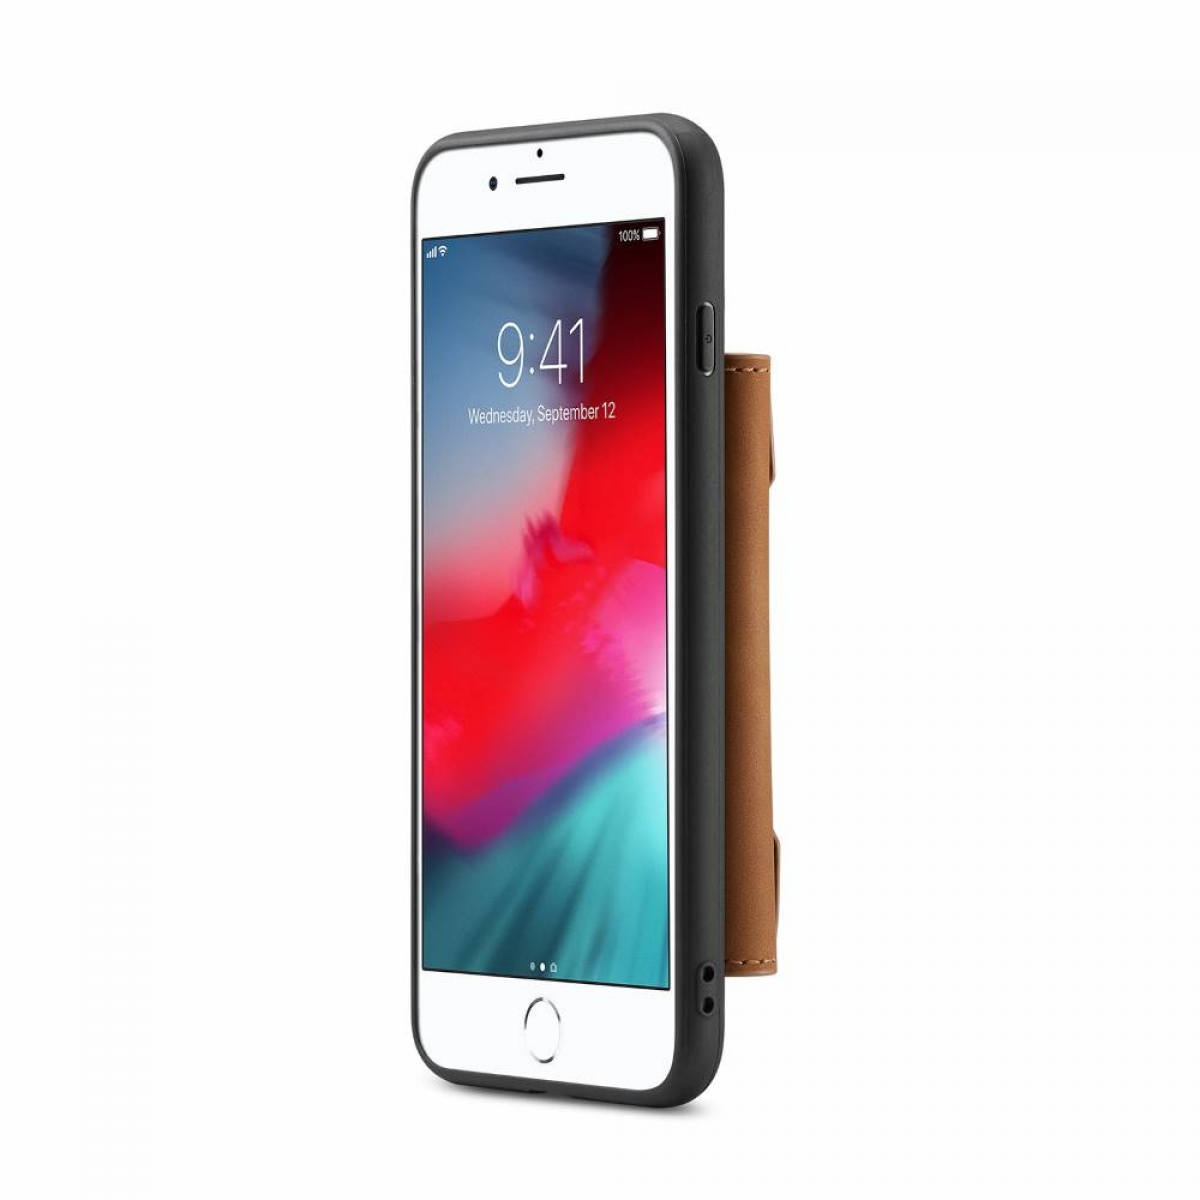 Plus, MING iPhone M2 Backcover, DG 2in1, Apple, 7 Braun